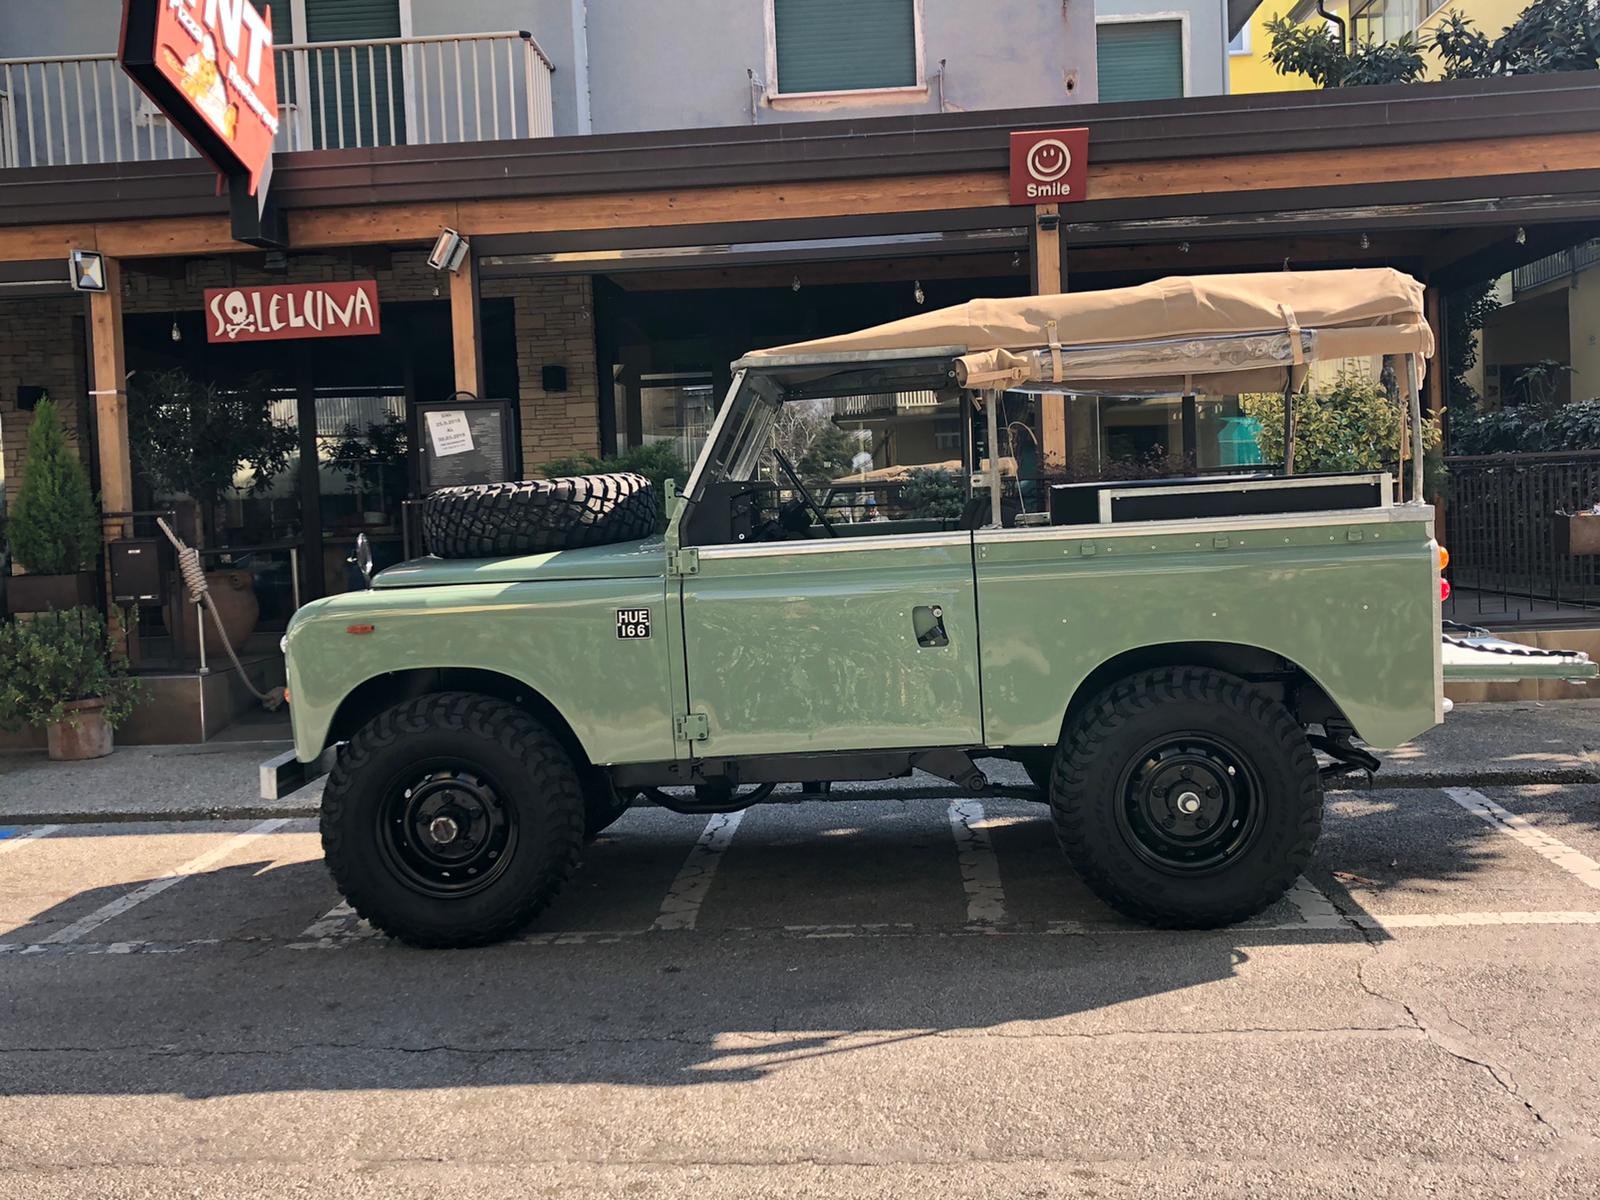 Land Rover collection